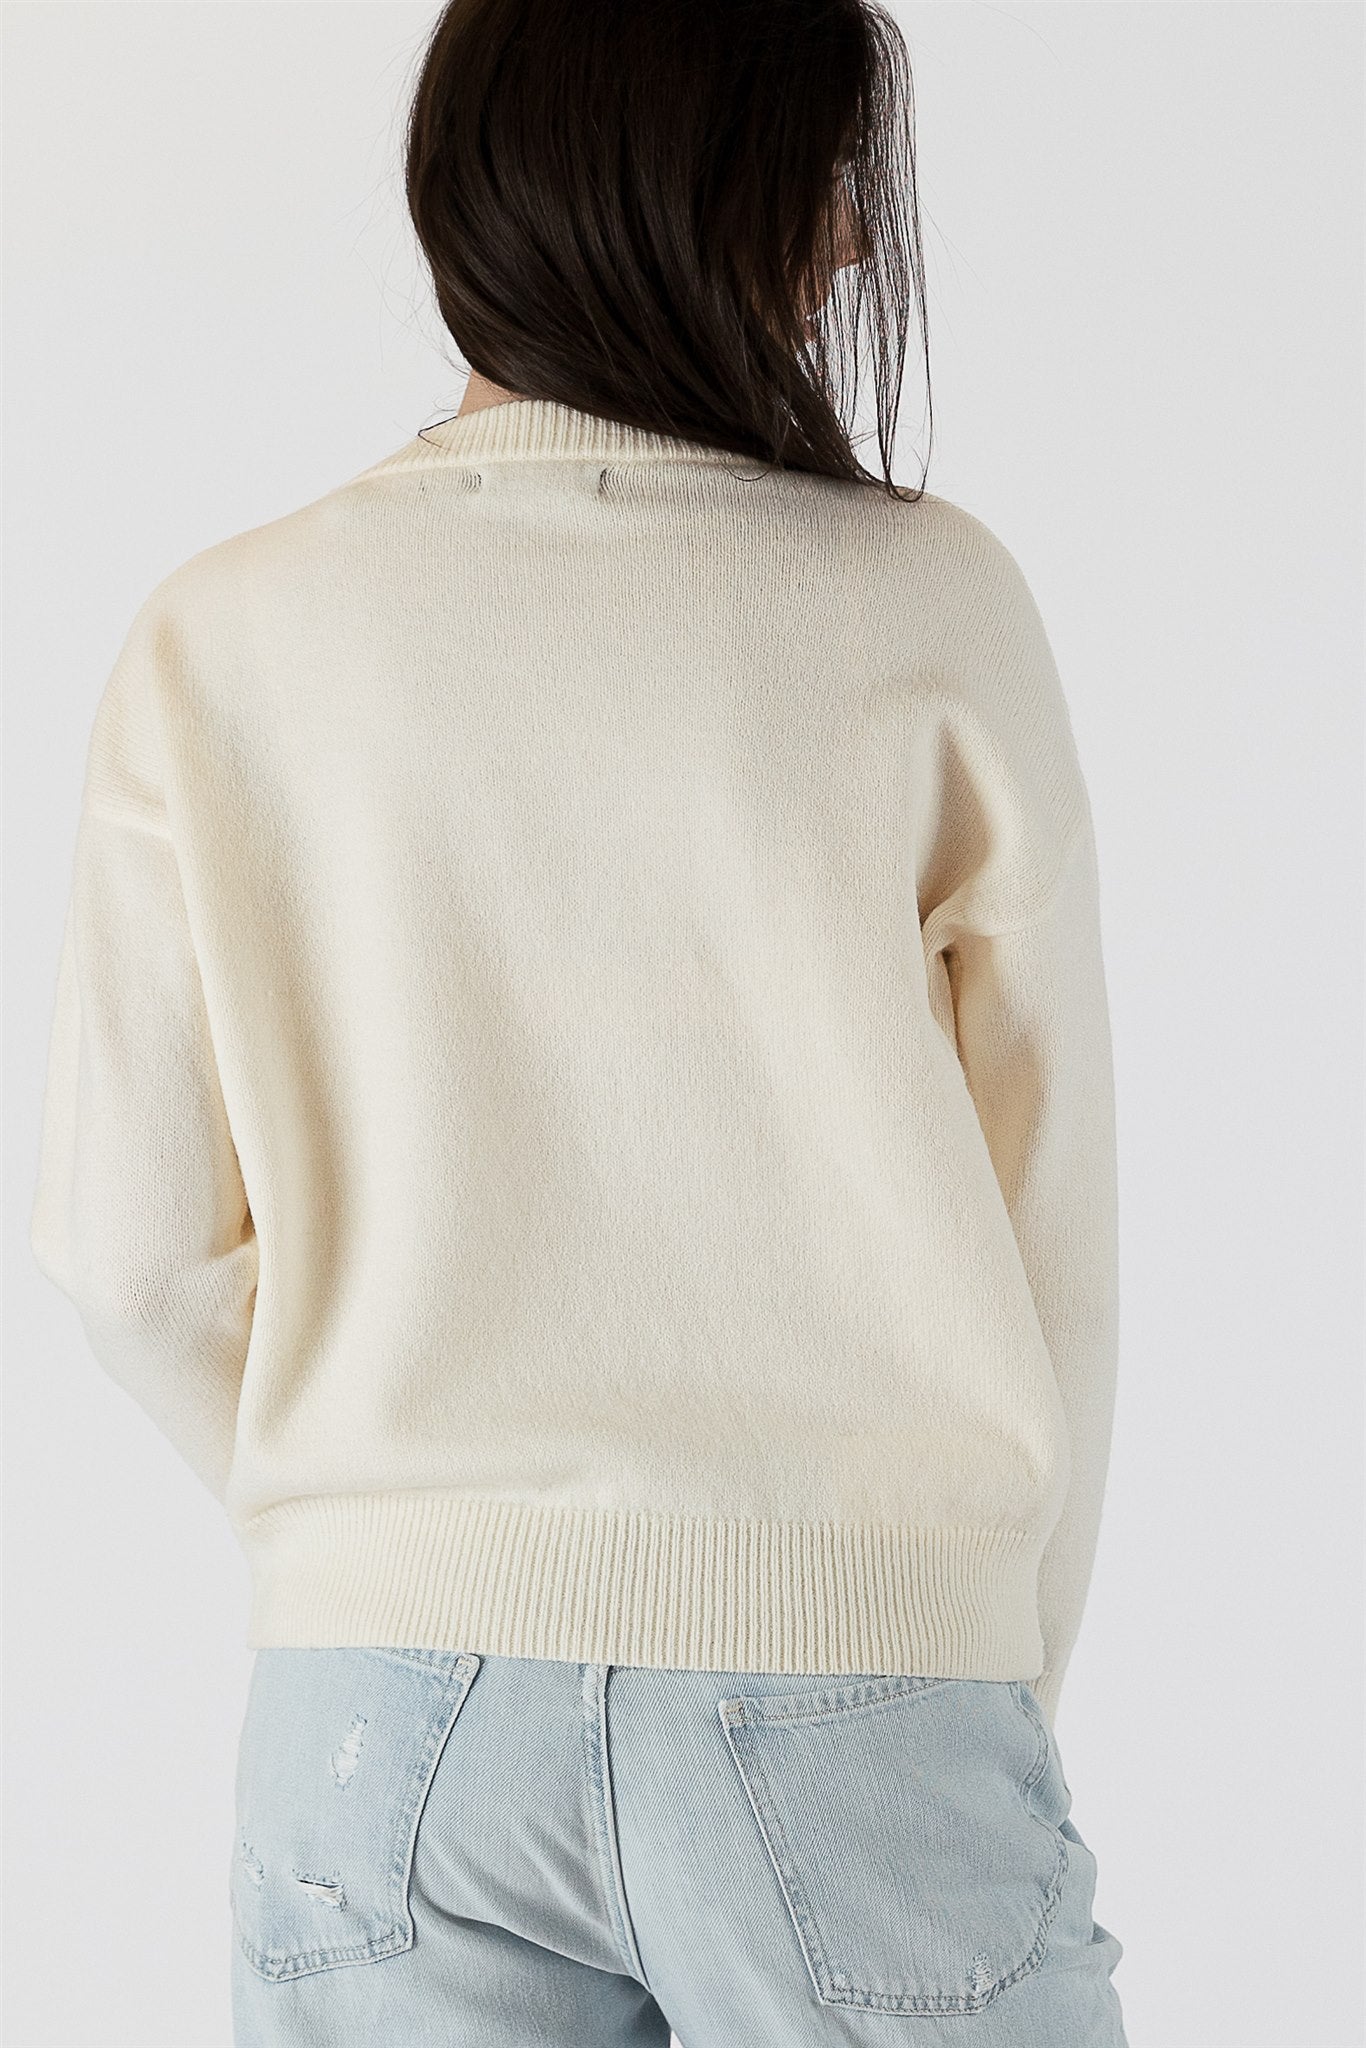 Lyla+Luxe Top - Pearl Sweater - Off White - SMALL